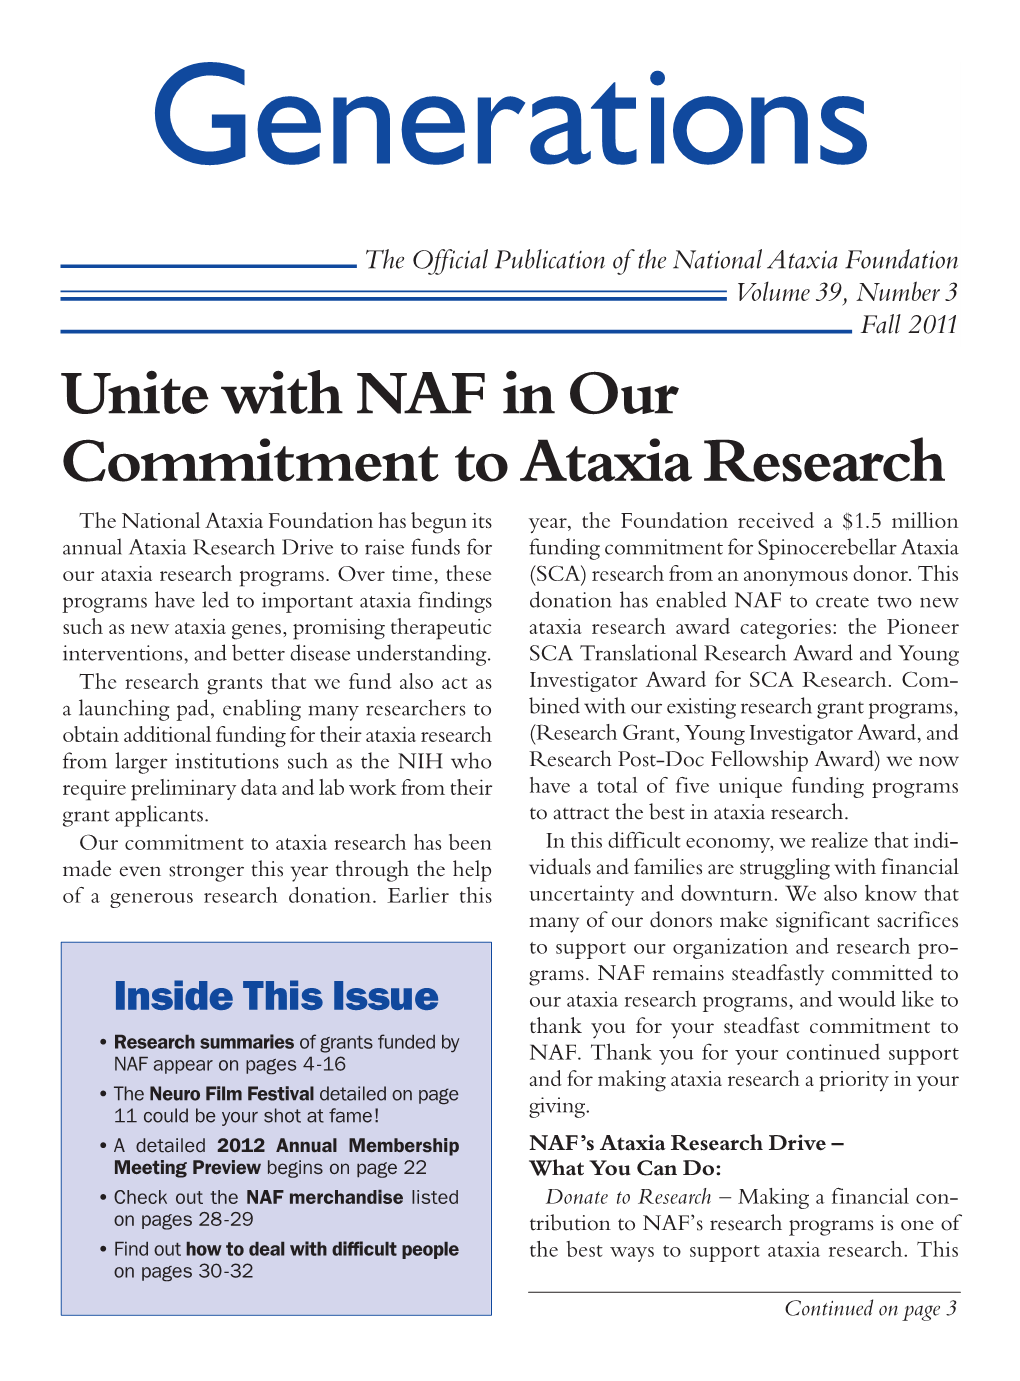 Unite with NAF in Our Commitment to Ataxia Research